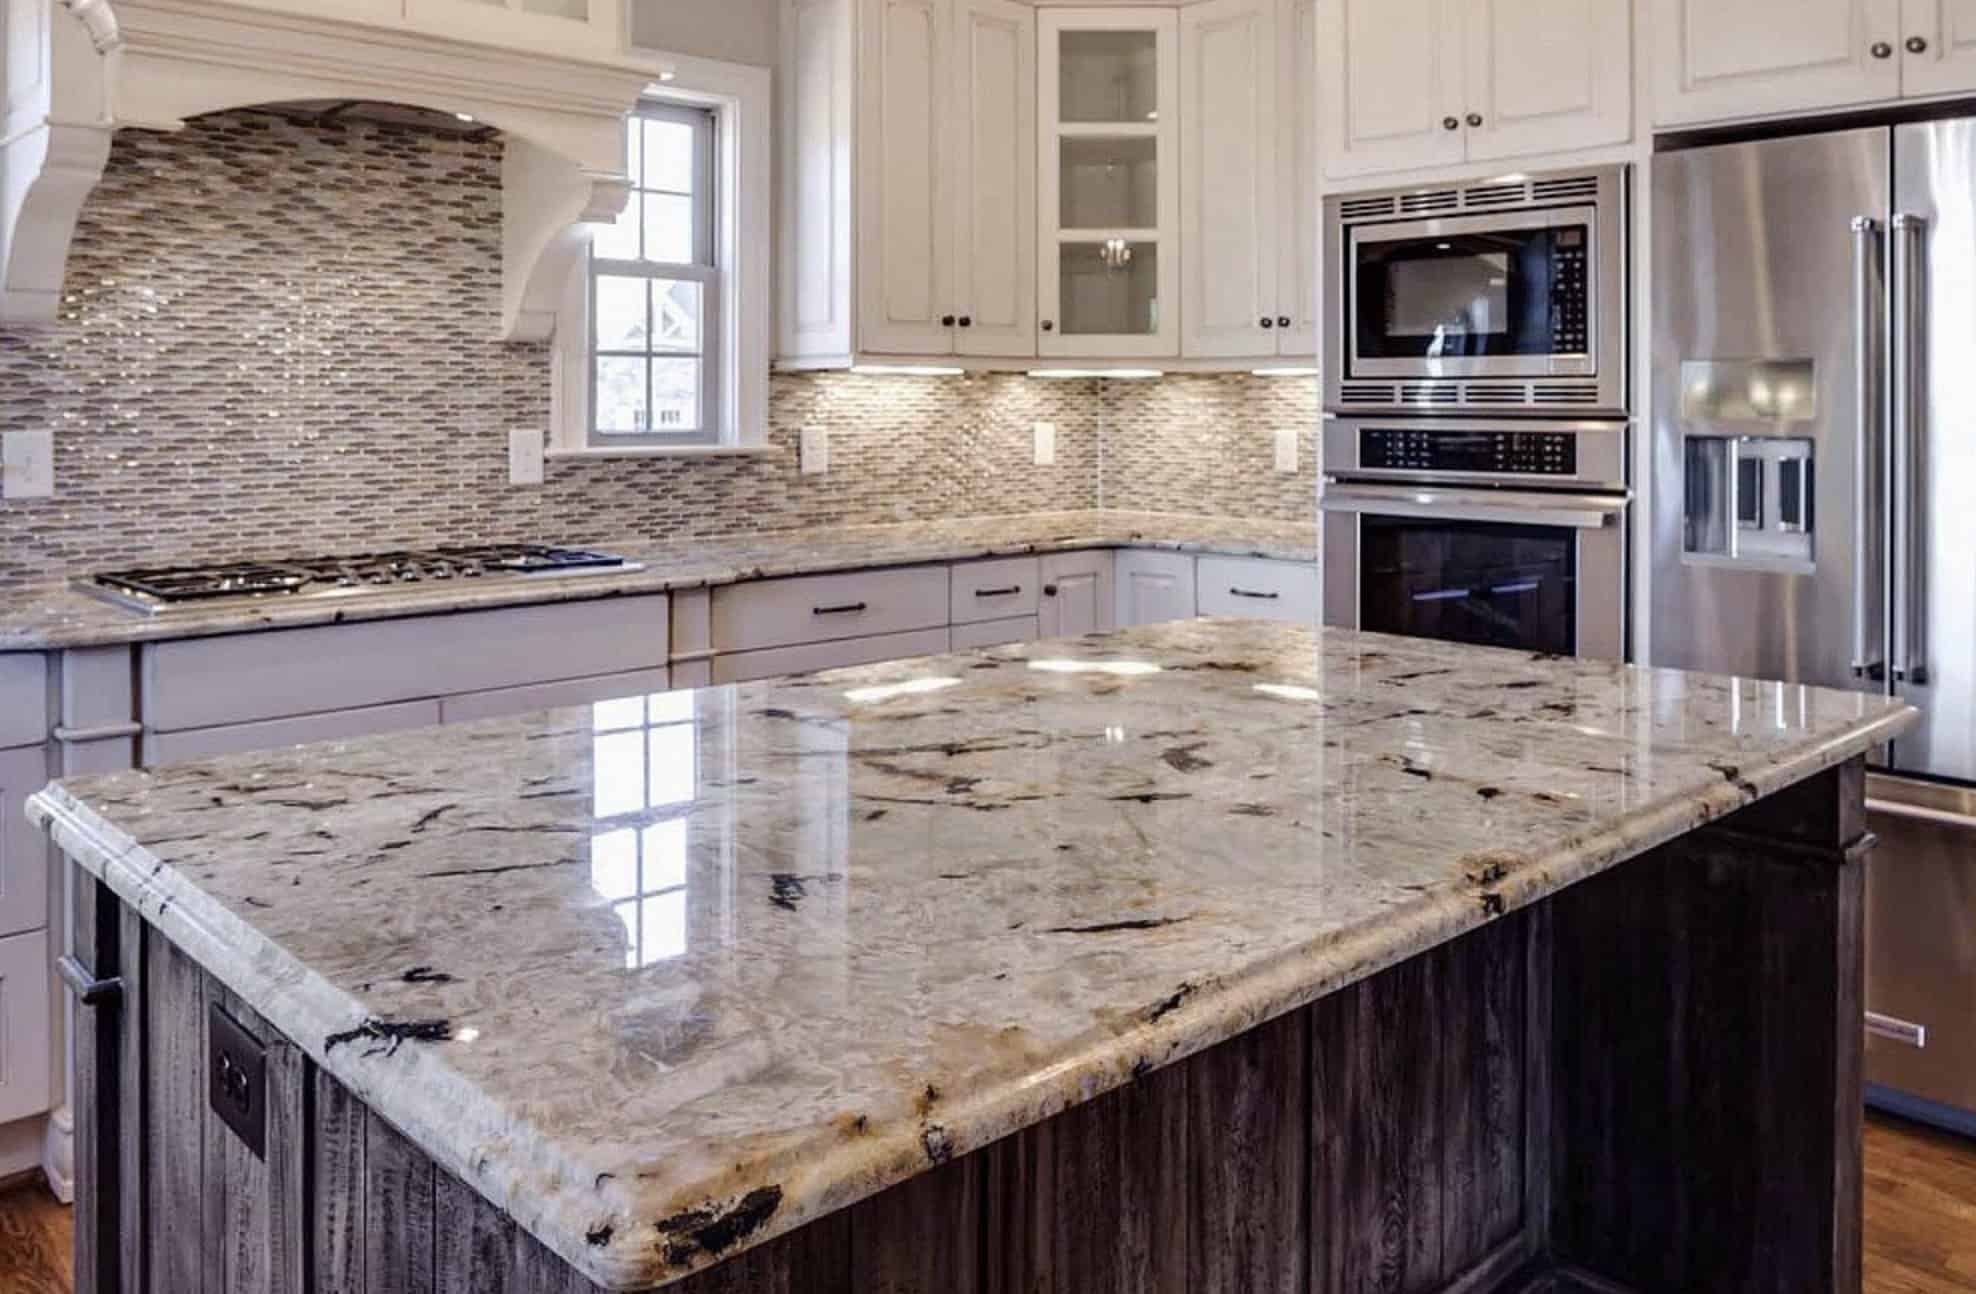 All About Granite Countertops Cost, What Is The Cost Of Granite Countertops